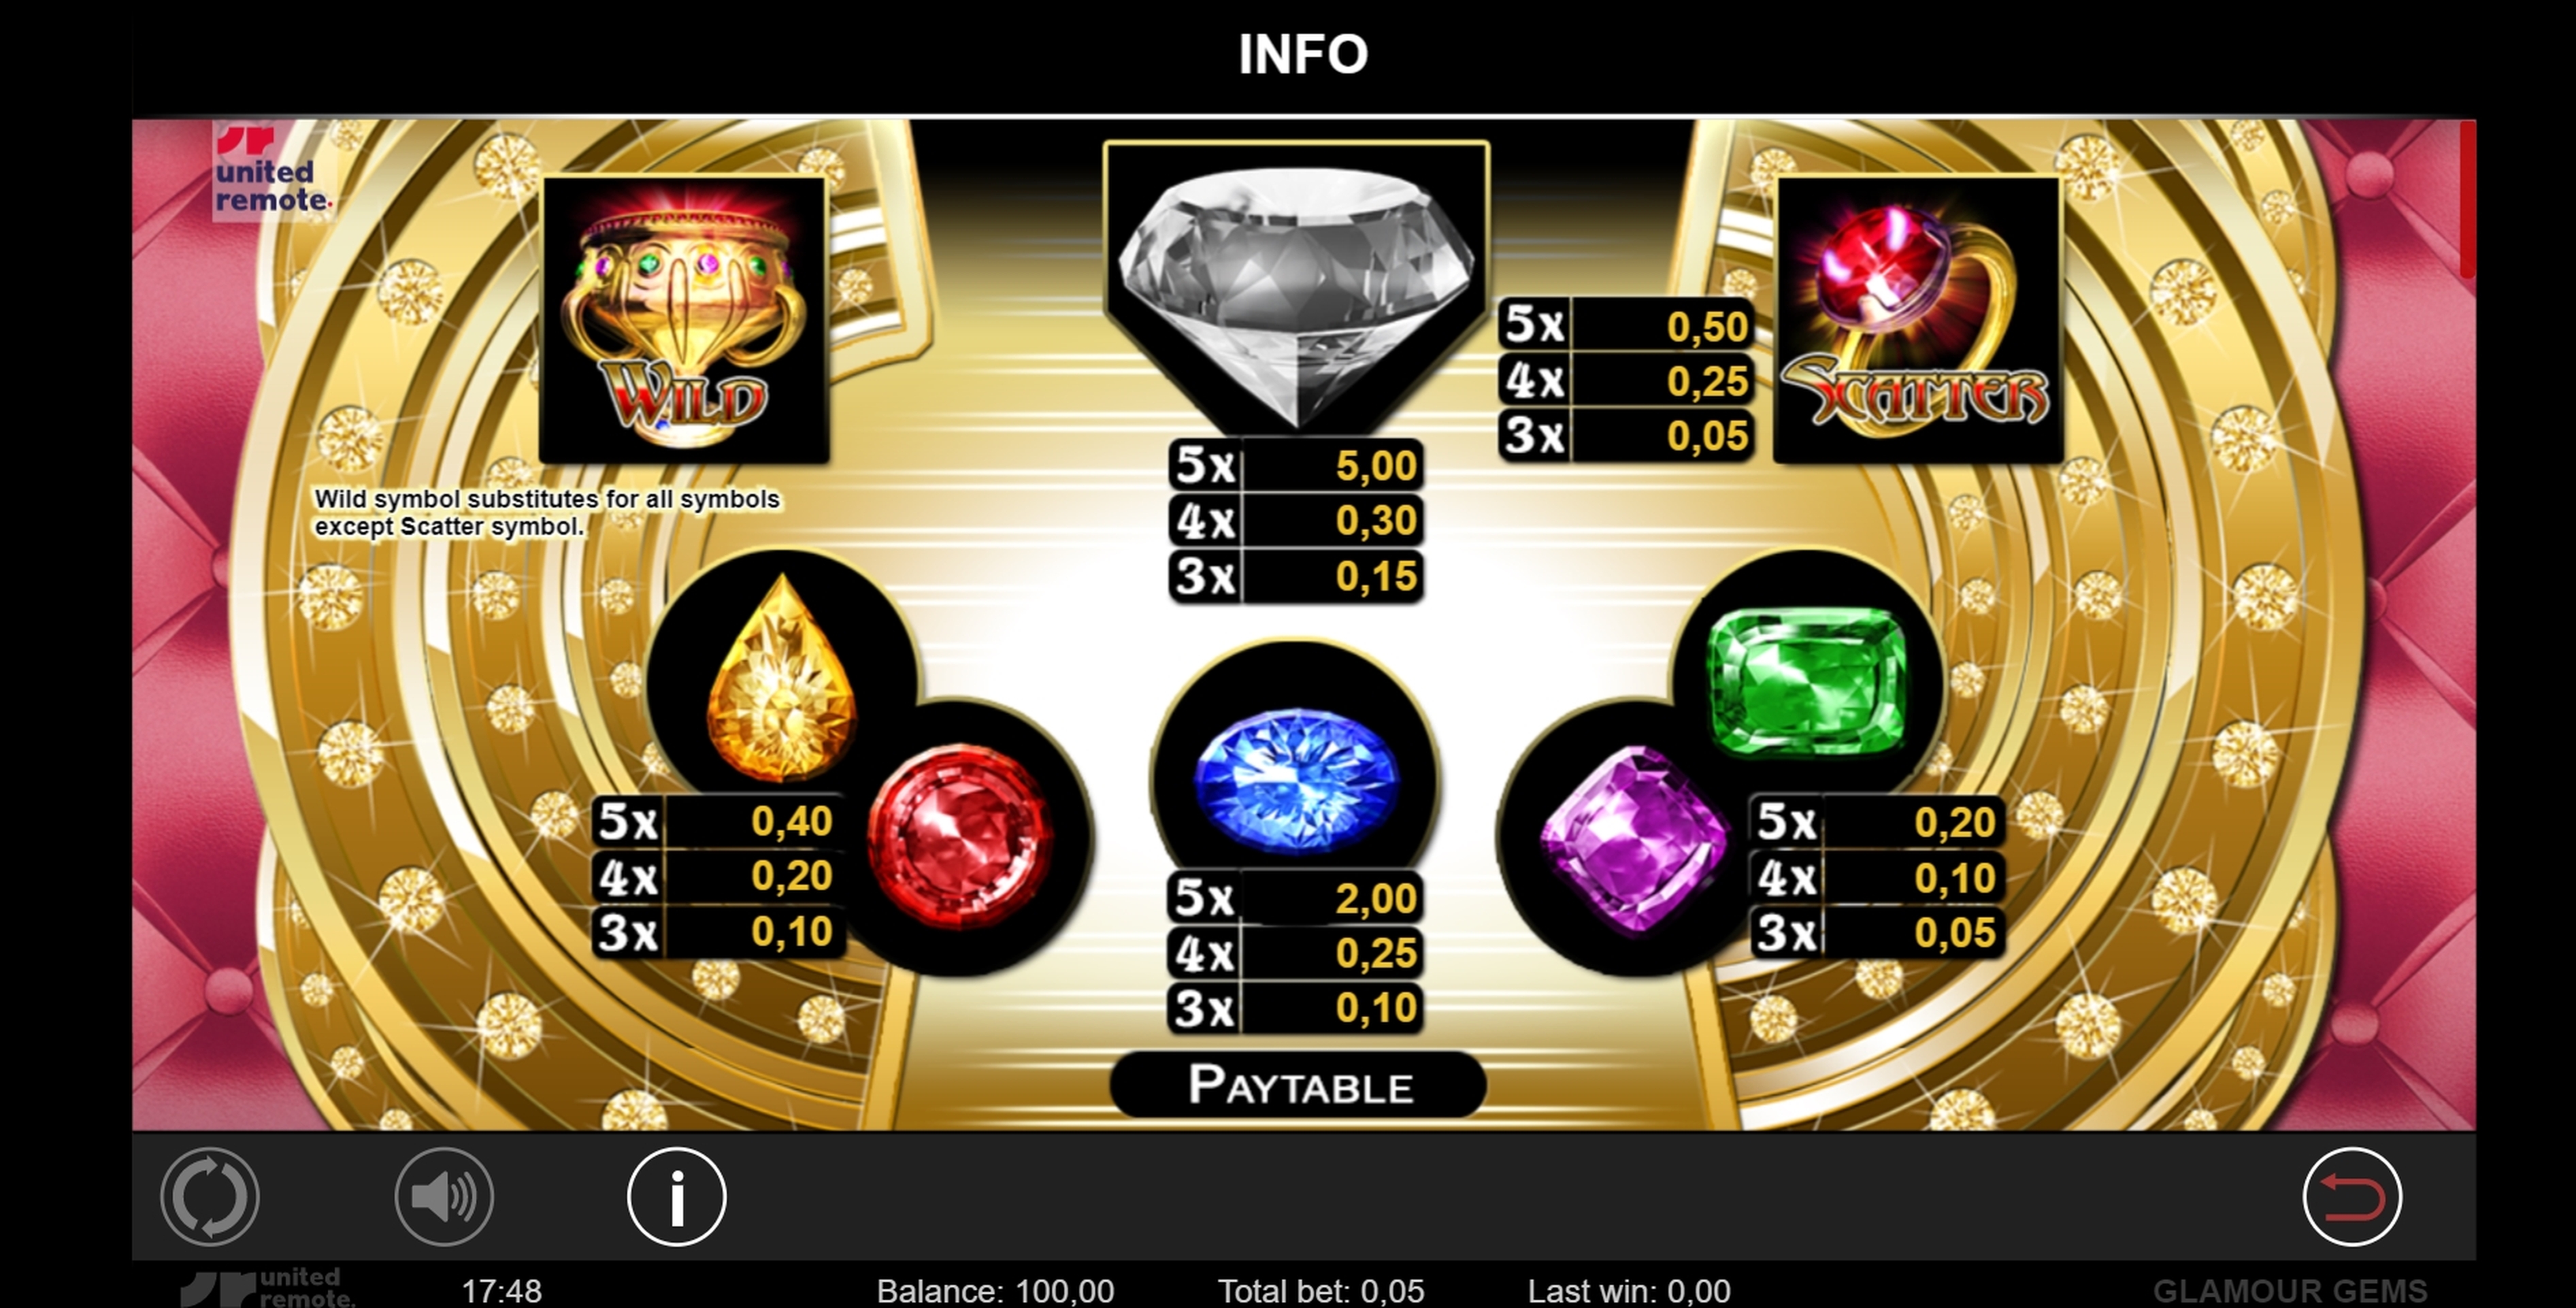 Info of Glamour Gems Slot Game by LionLine